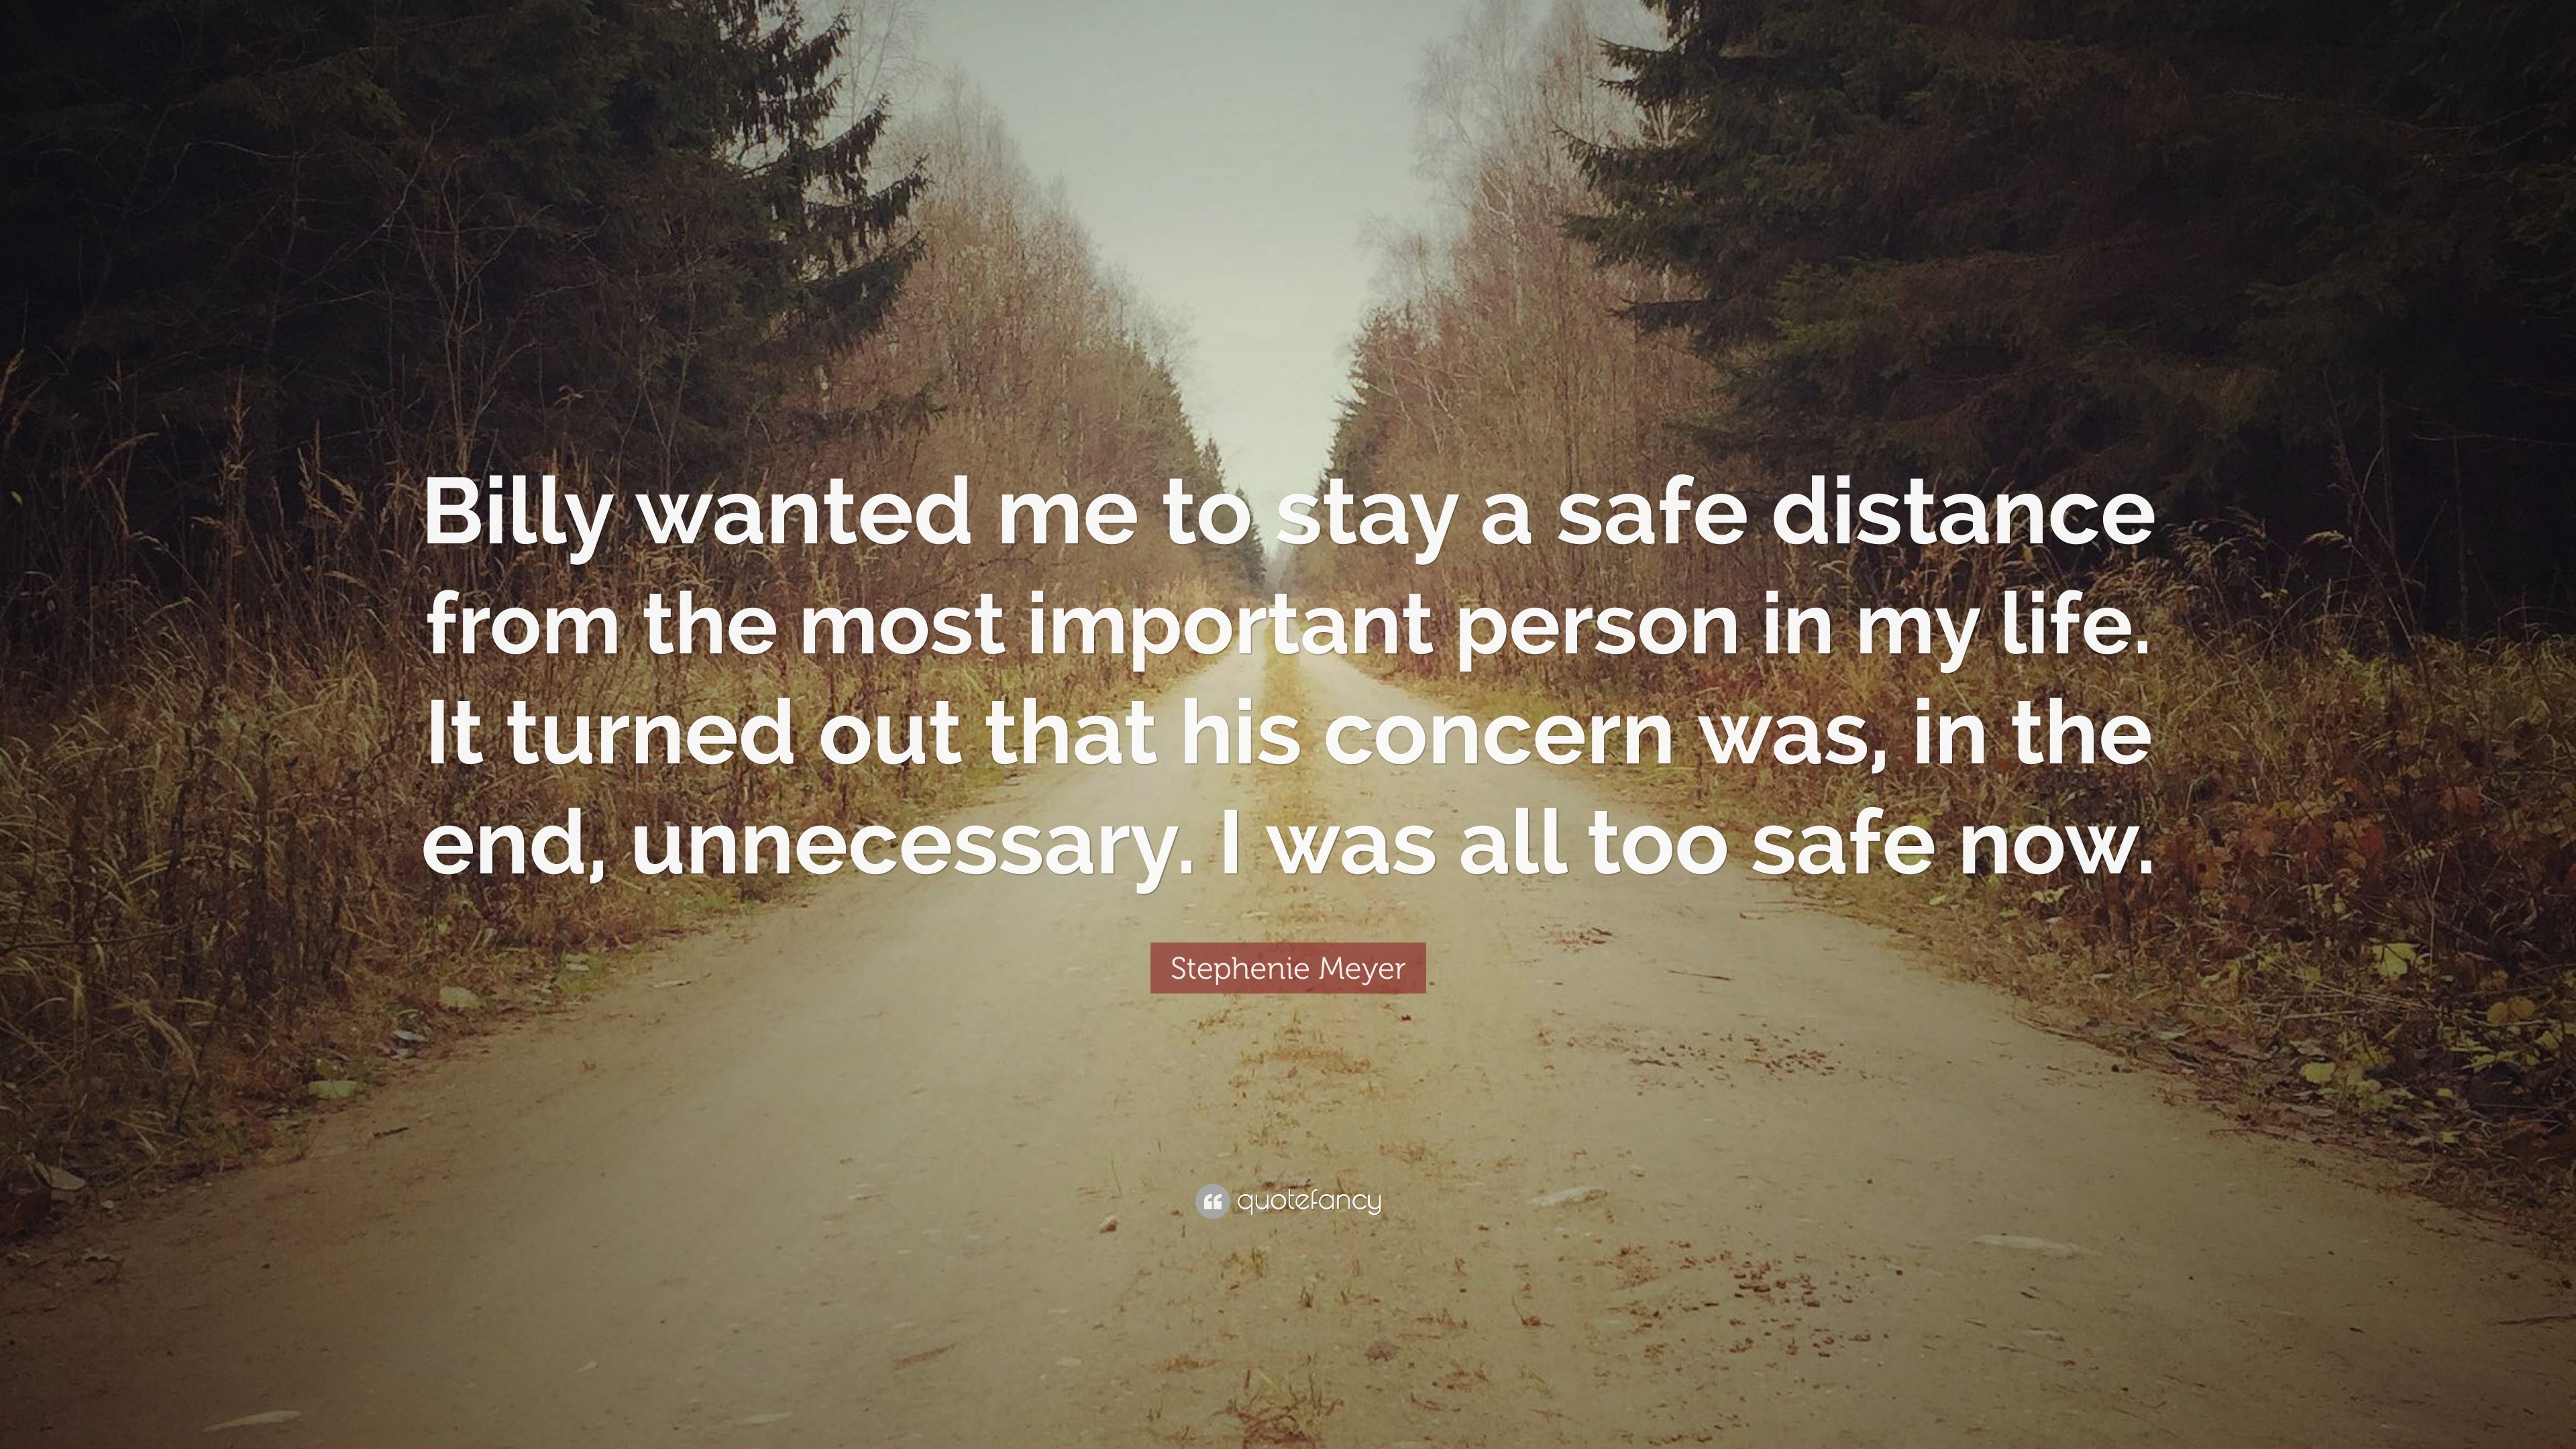 Stephenie Meyer Quote “Billy wanted me to stay a safe distance from the most